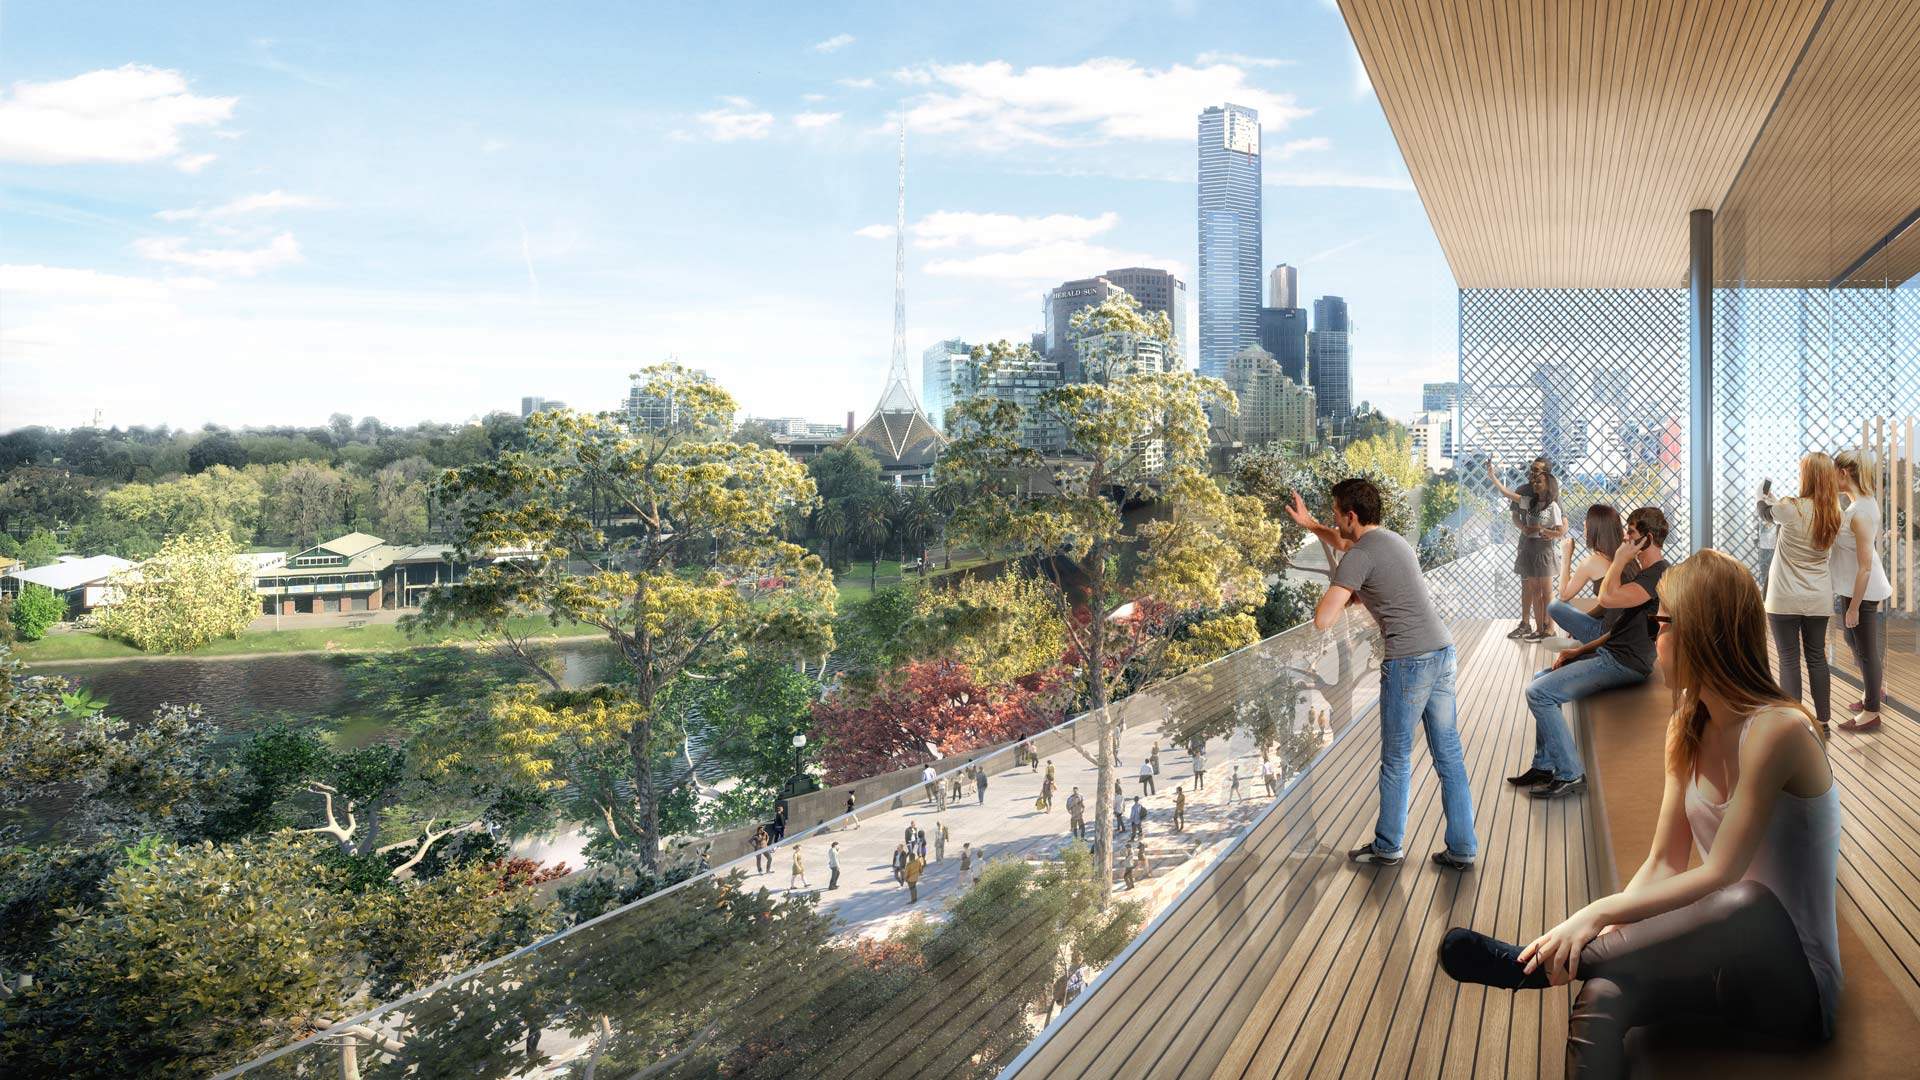 New Designs Have Been Revealed for Apple's Proposed Federation Square Store